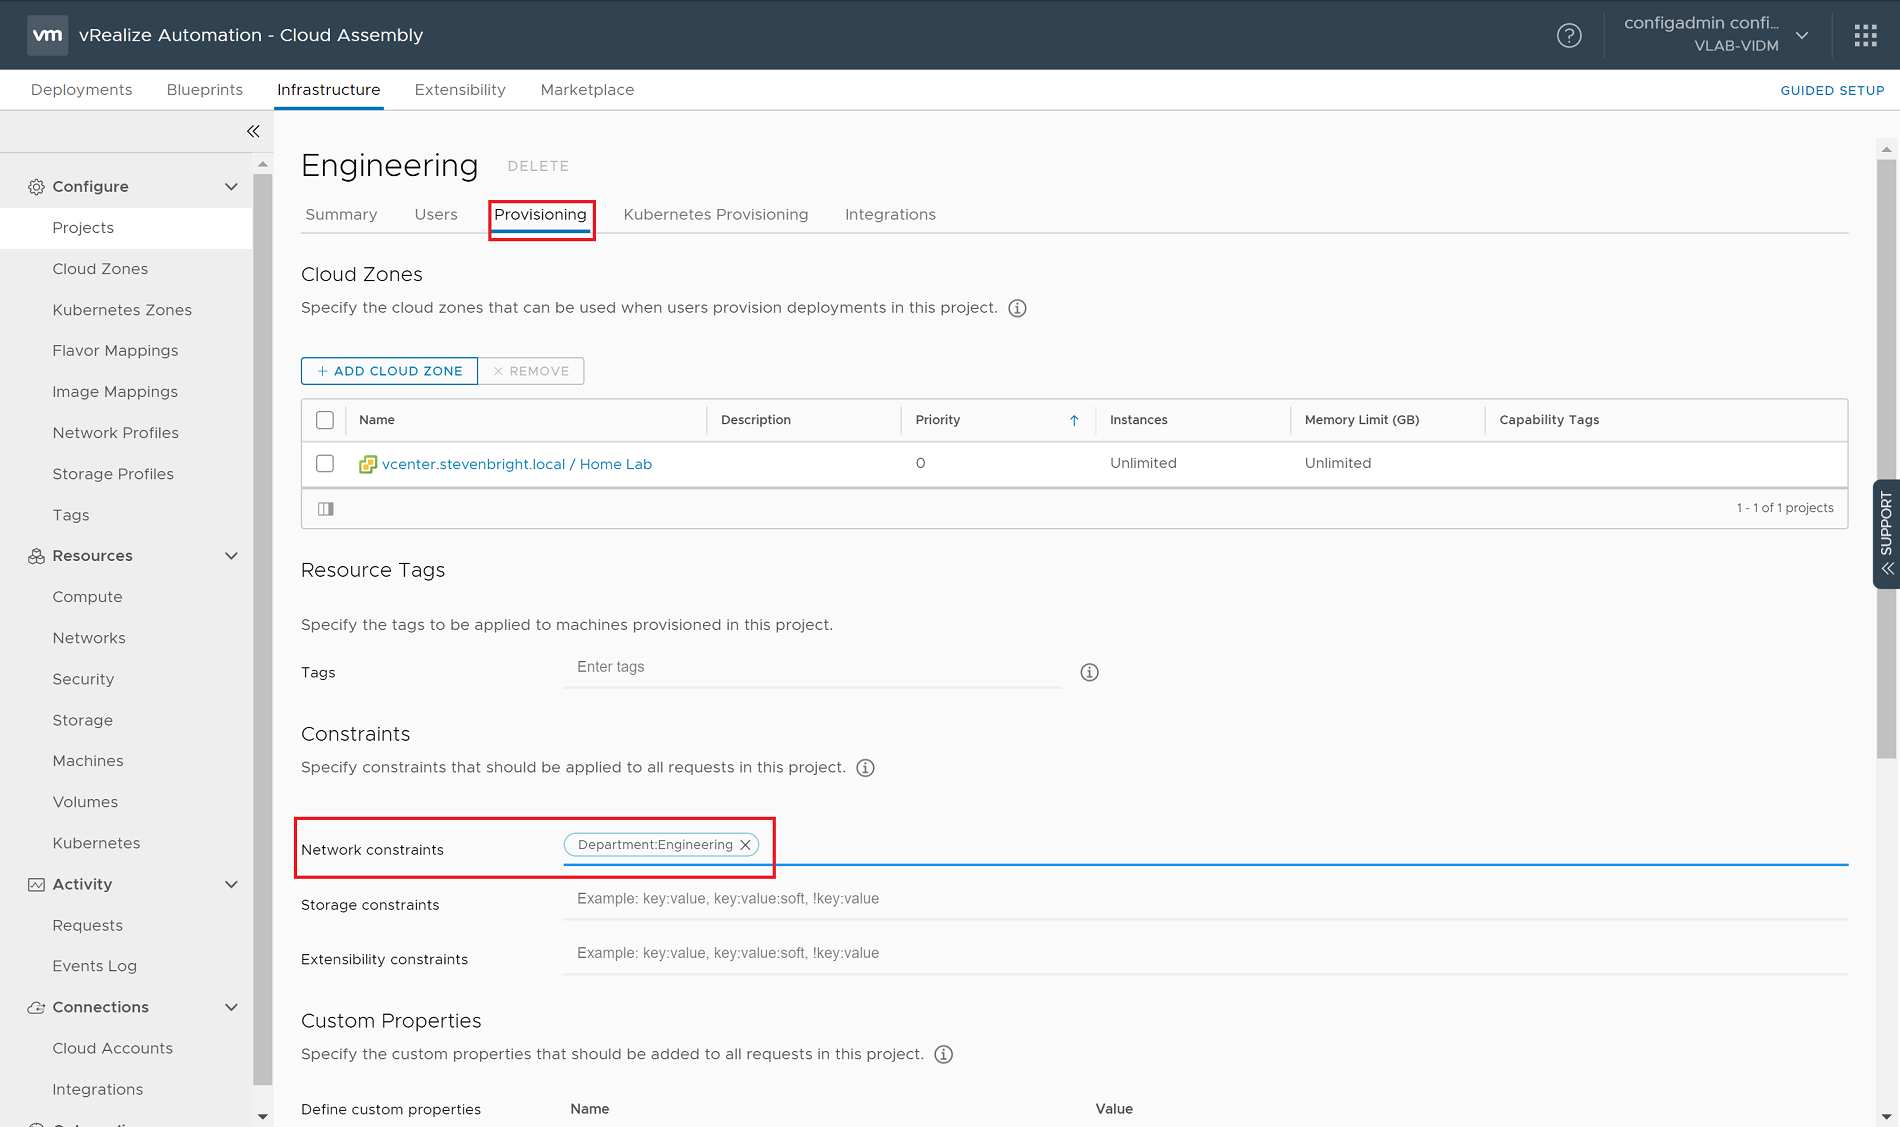 vRealize Automation 8.0 - Cloud Assembly - Infrastructure - Projects - Engineering Project - Provisioning Tab - With Network Constraint Defined